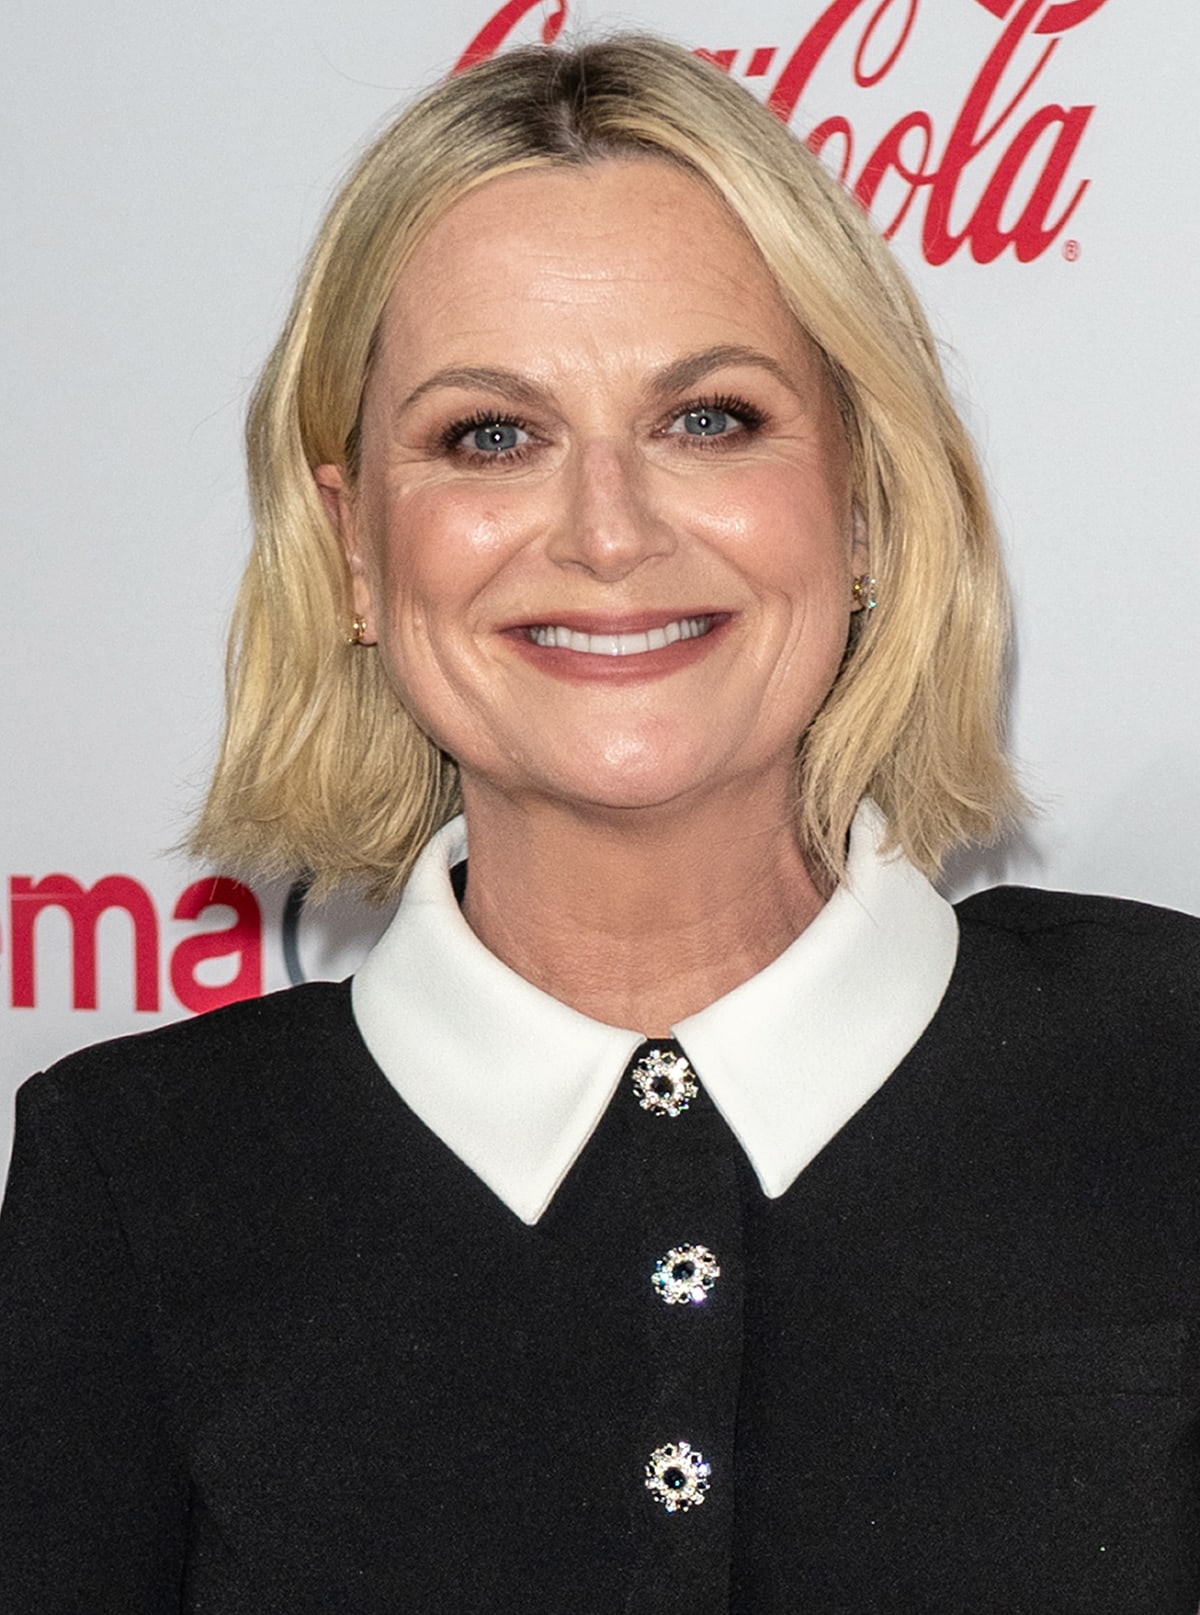 Amy Poehler wears her blonde bob in soft waves and highlights her blue eyes with smudged, smokey eyeshadow